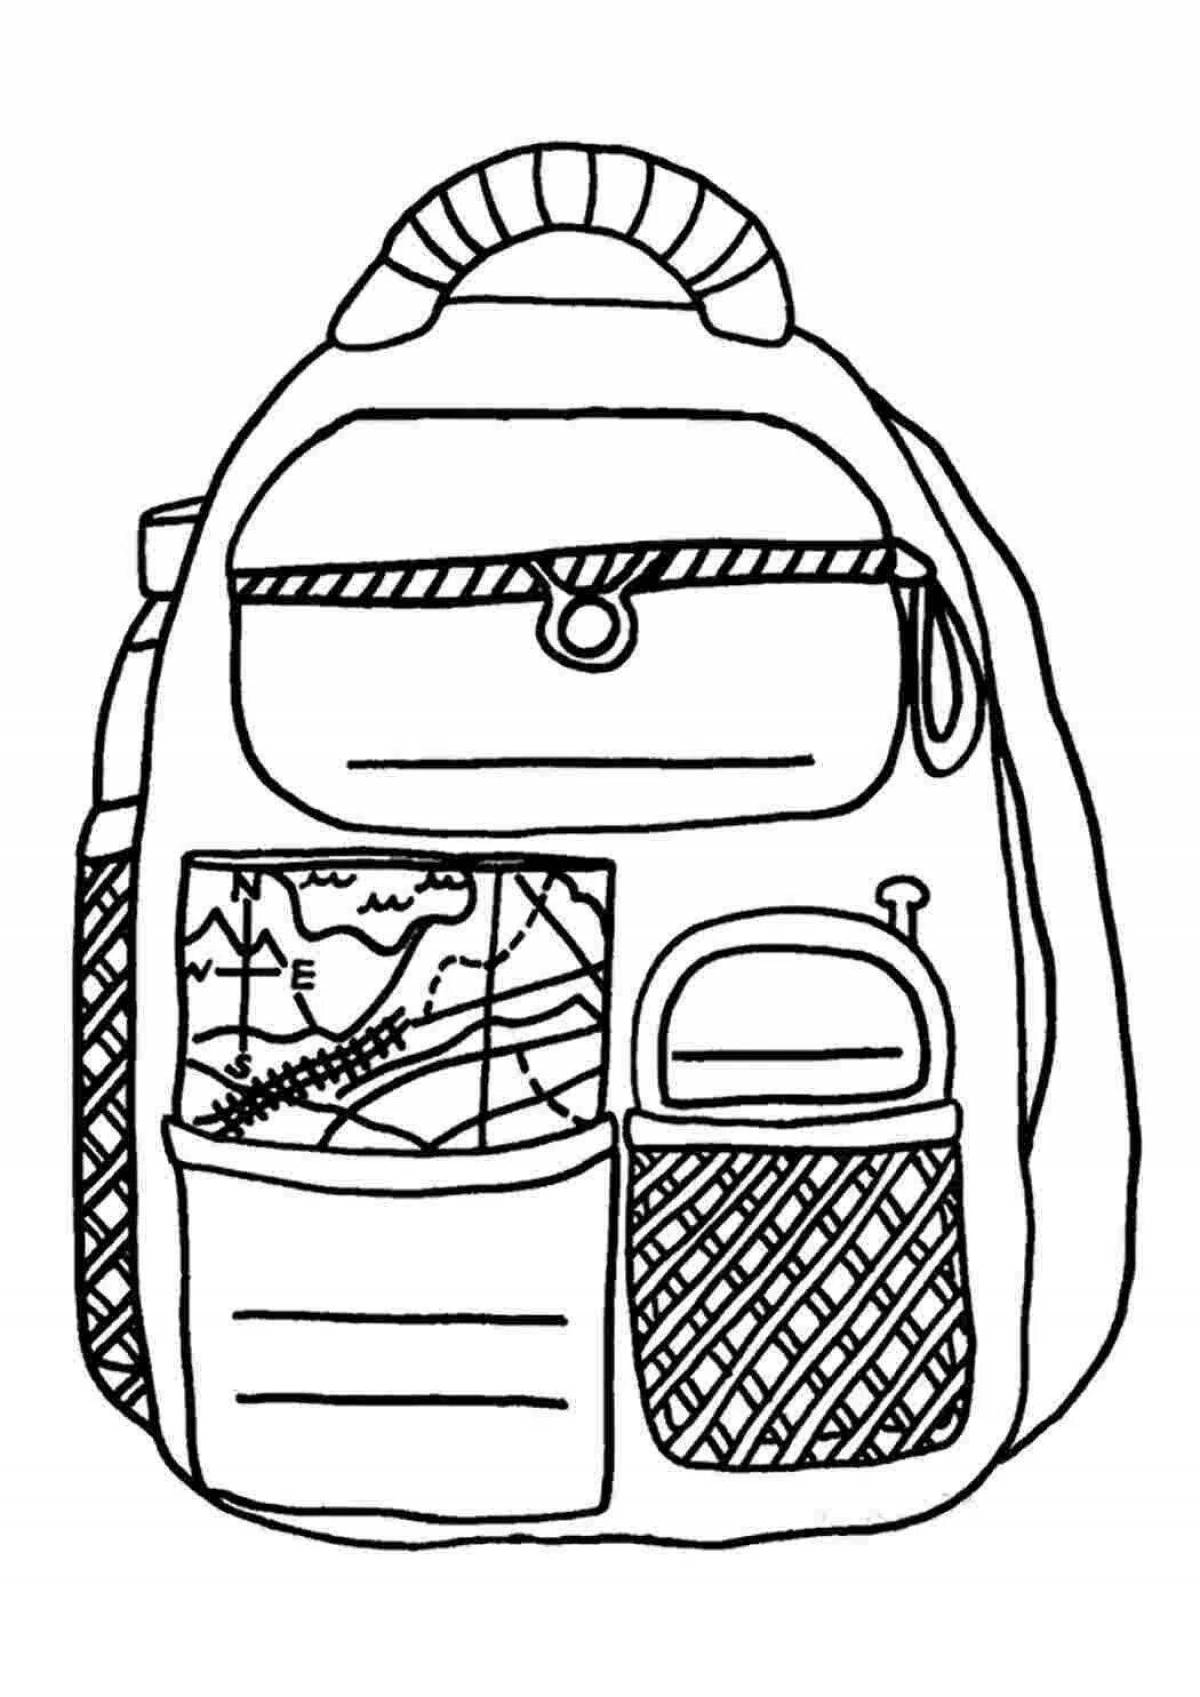 Incredible briefcase coloring book for kids